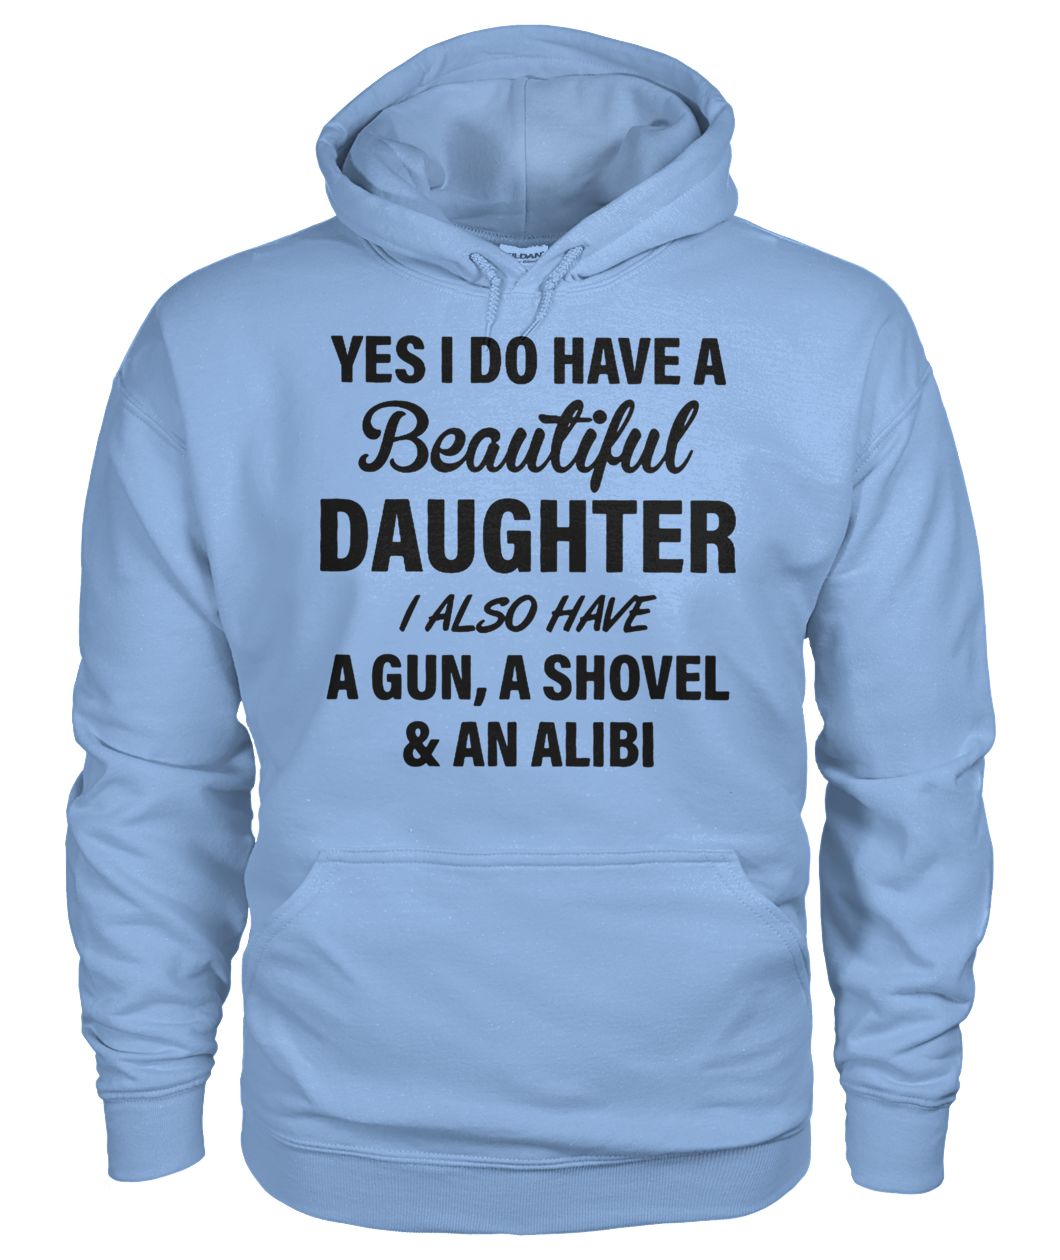 Yes I do have a beautiful daughter I also have a gun a shovel and an alibi gildan hoodie